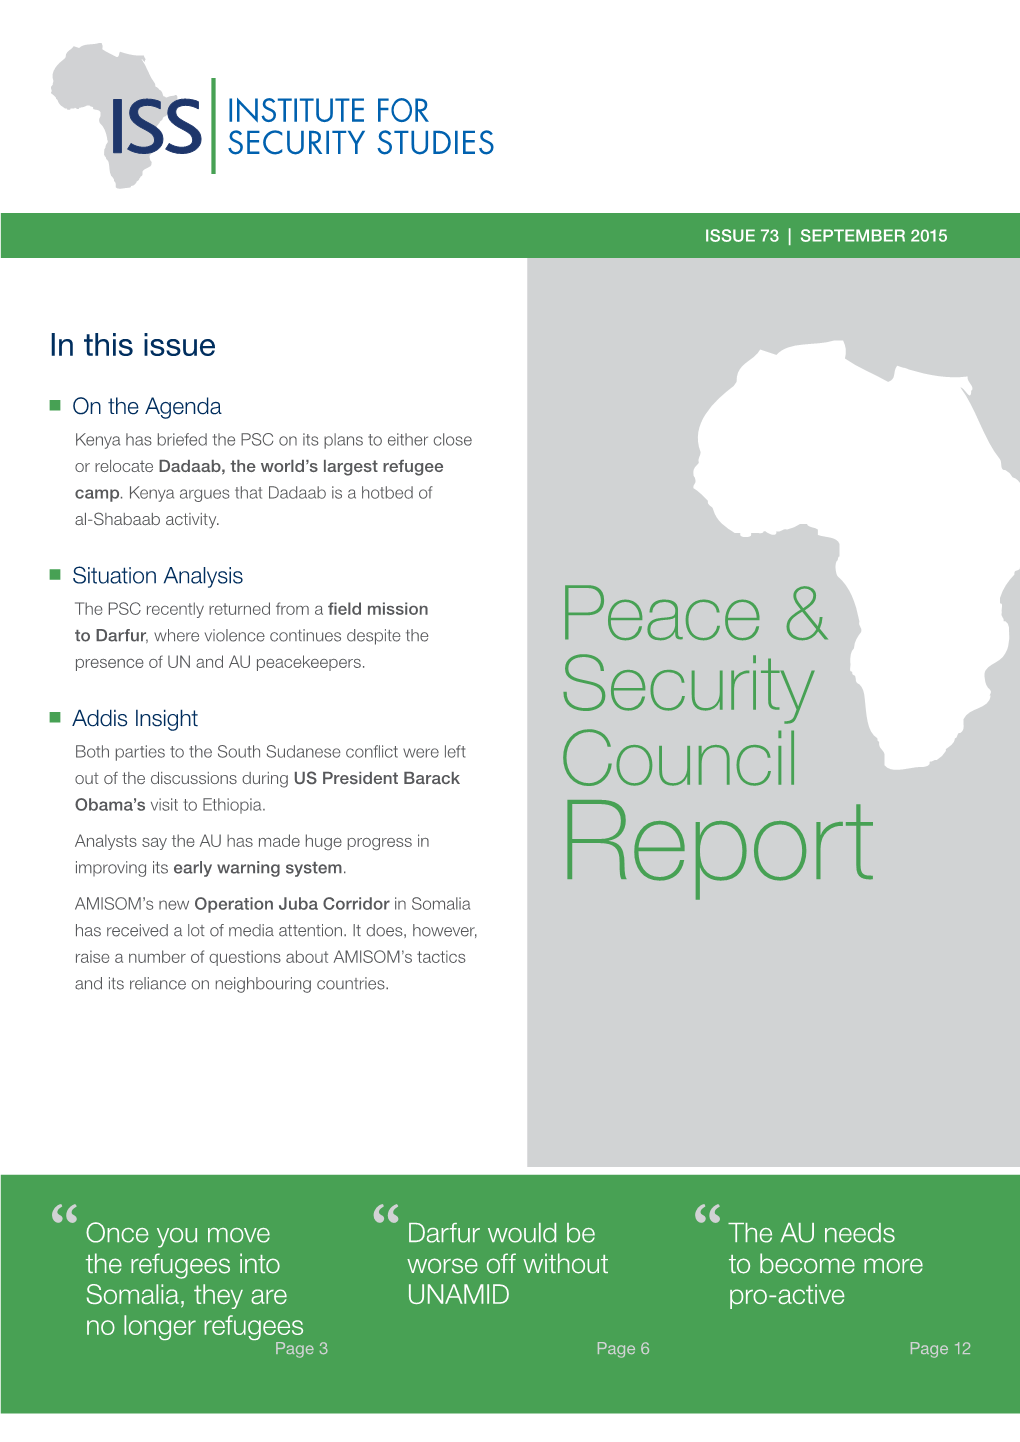 ISS Peace and Security Council Report, No 73